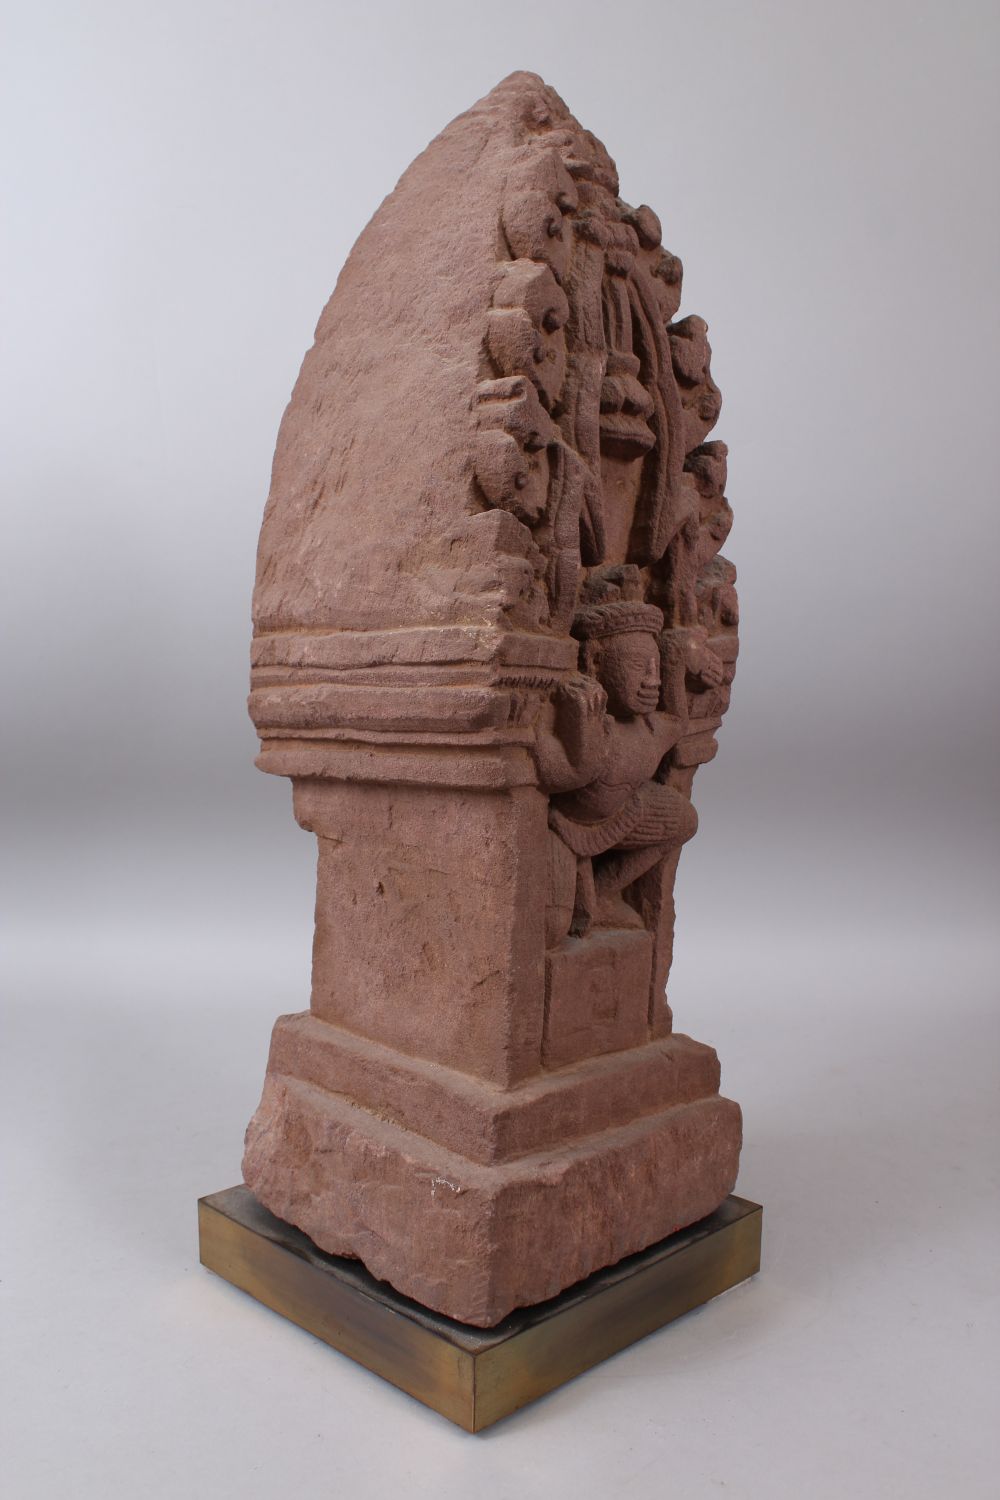 A CAMBODIAN KHMER STYLE CARVING OF A CROUCHING FIGURE IN A TEMPLE. - Image 4 of 6